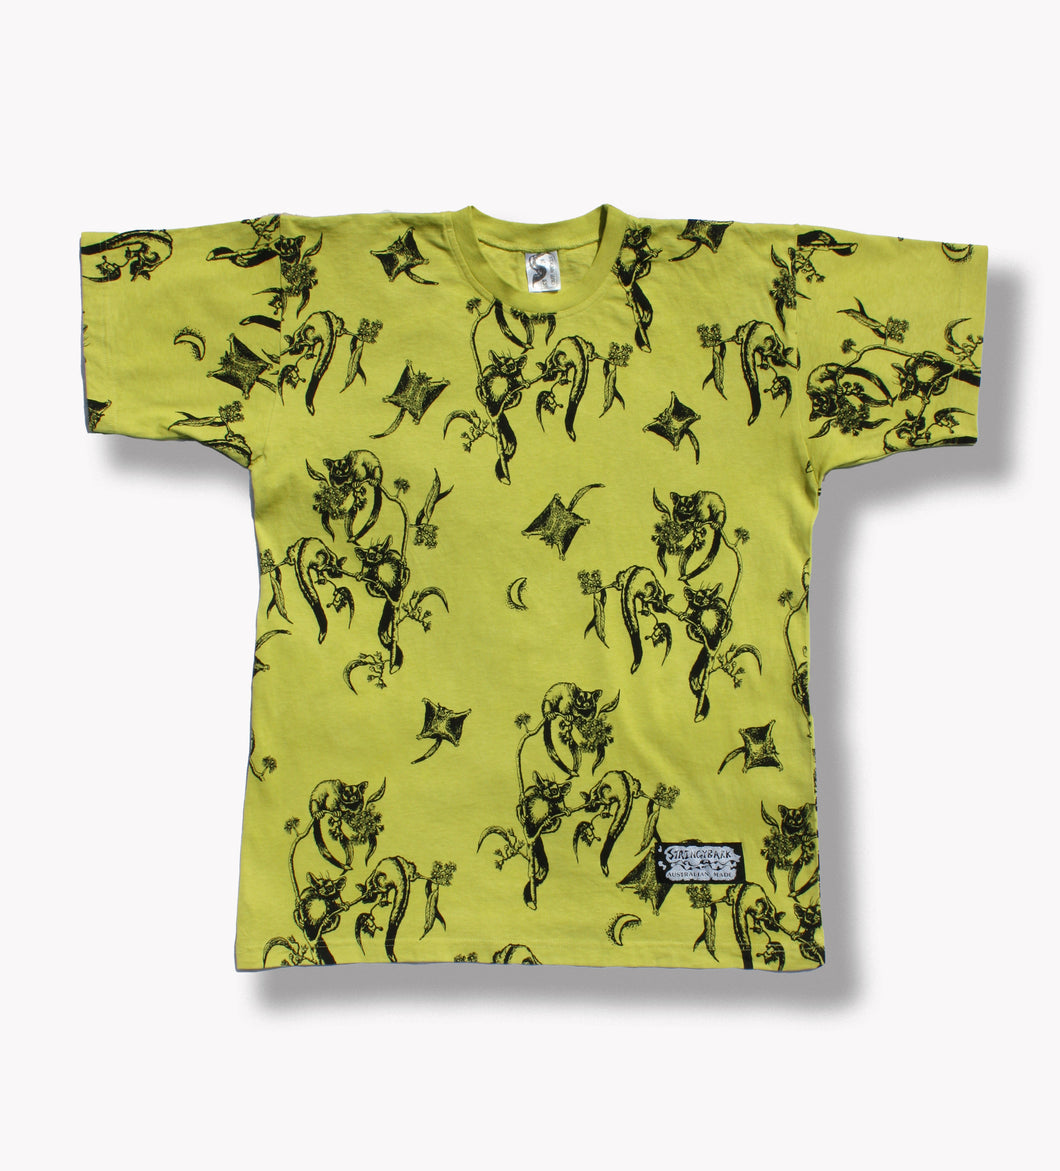 NOCTURNAL MARSUPIAL UNISEX T-SHIRT in Chartreuse